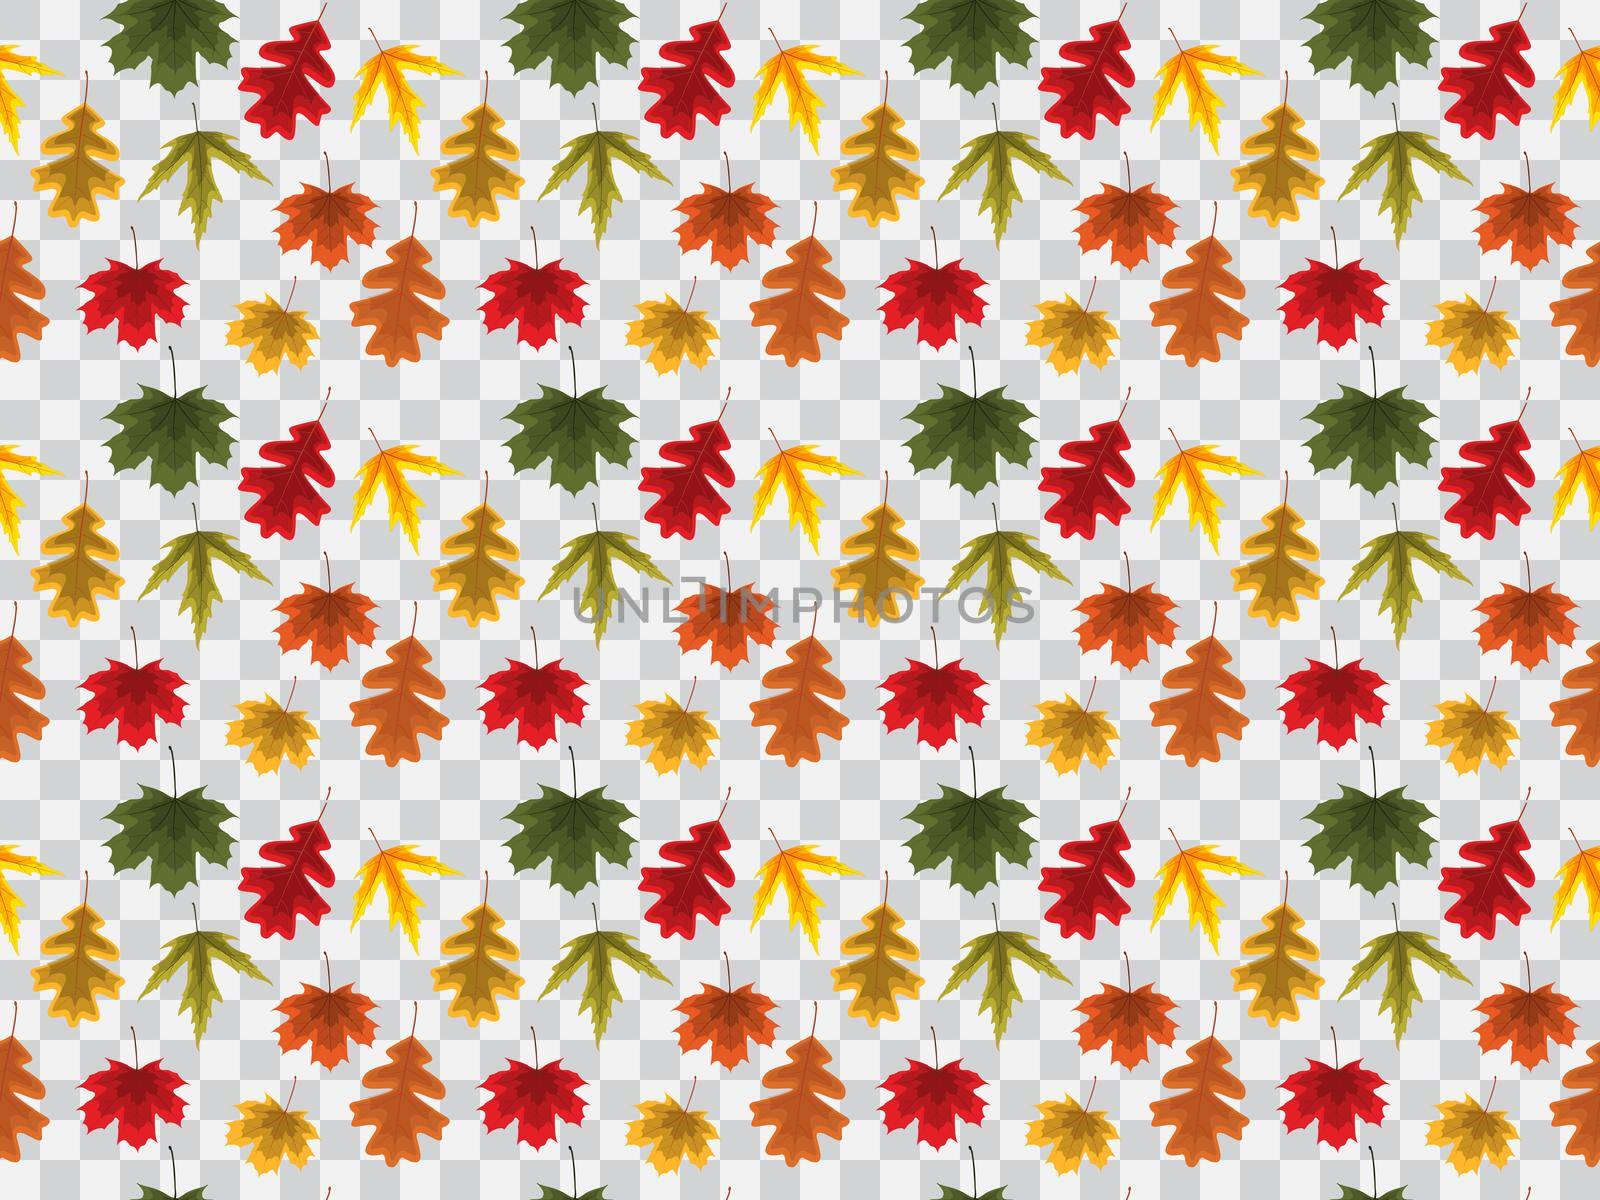 Autumn Leaves Seamless Pattern on Transparent Background Vector Illustration by yganko